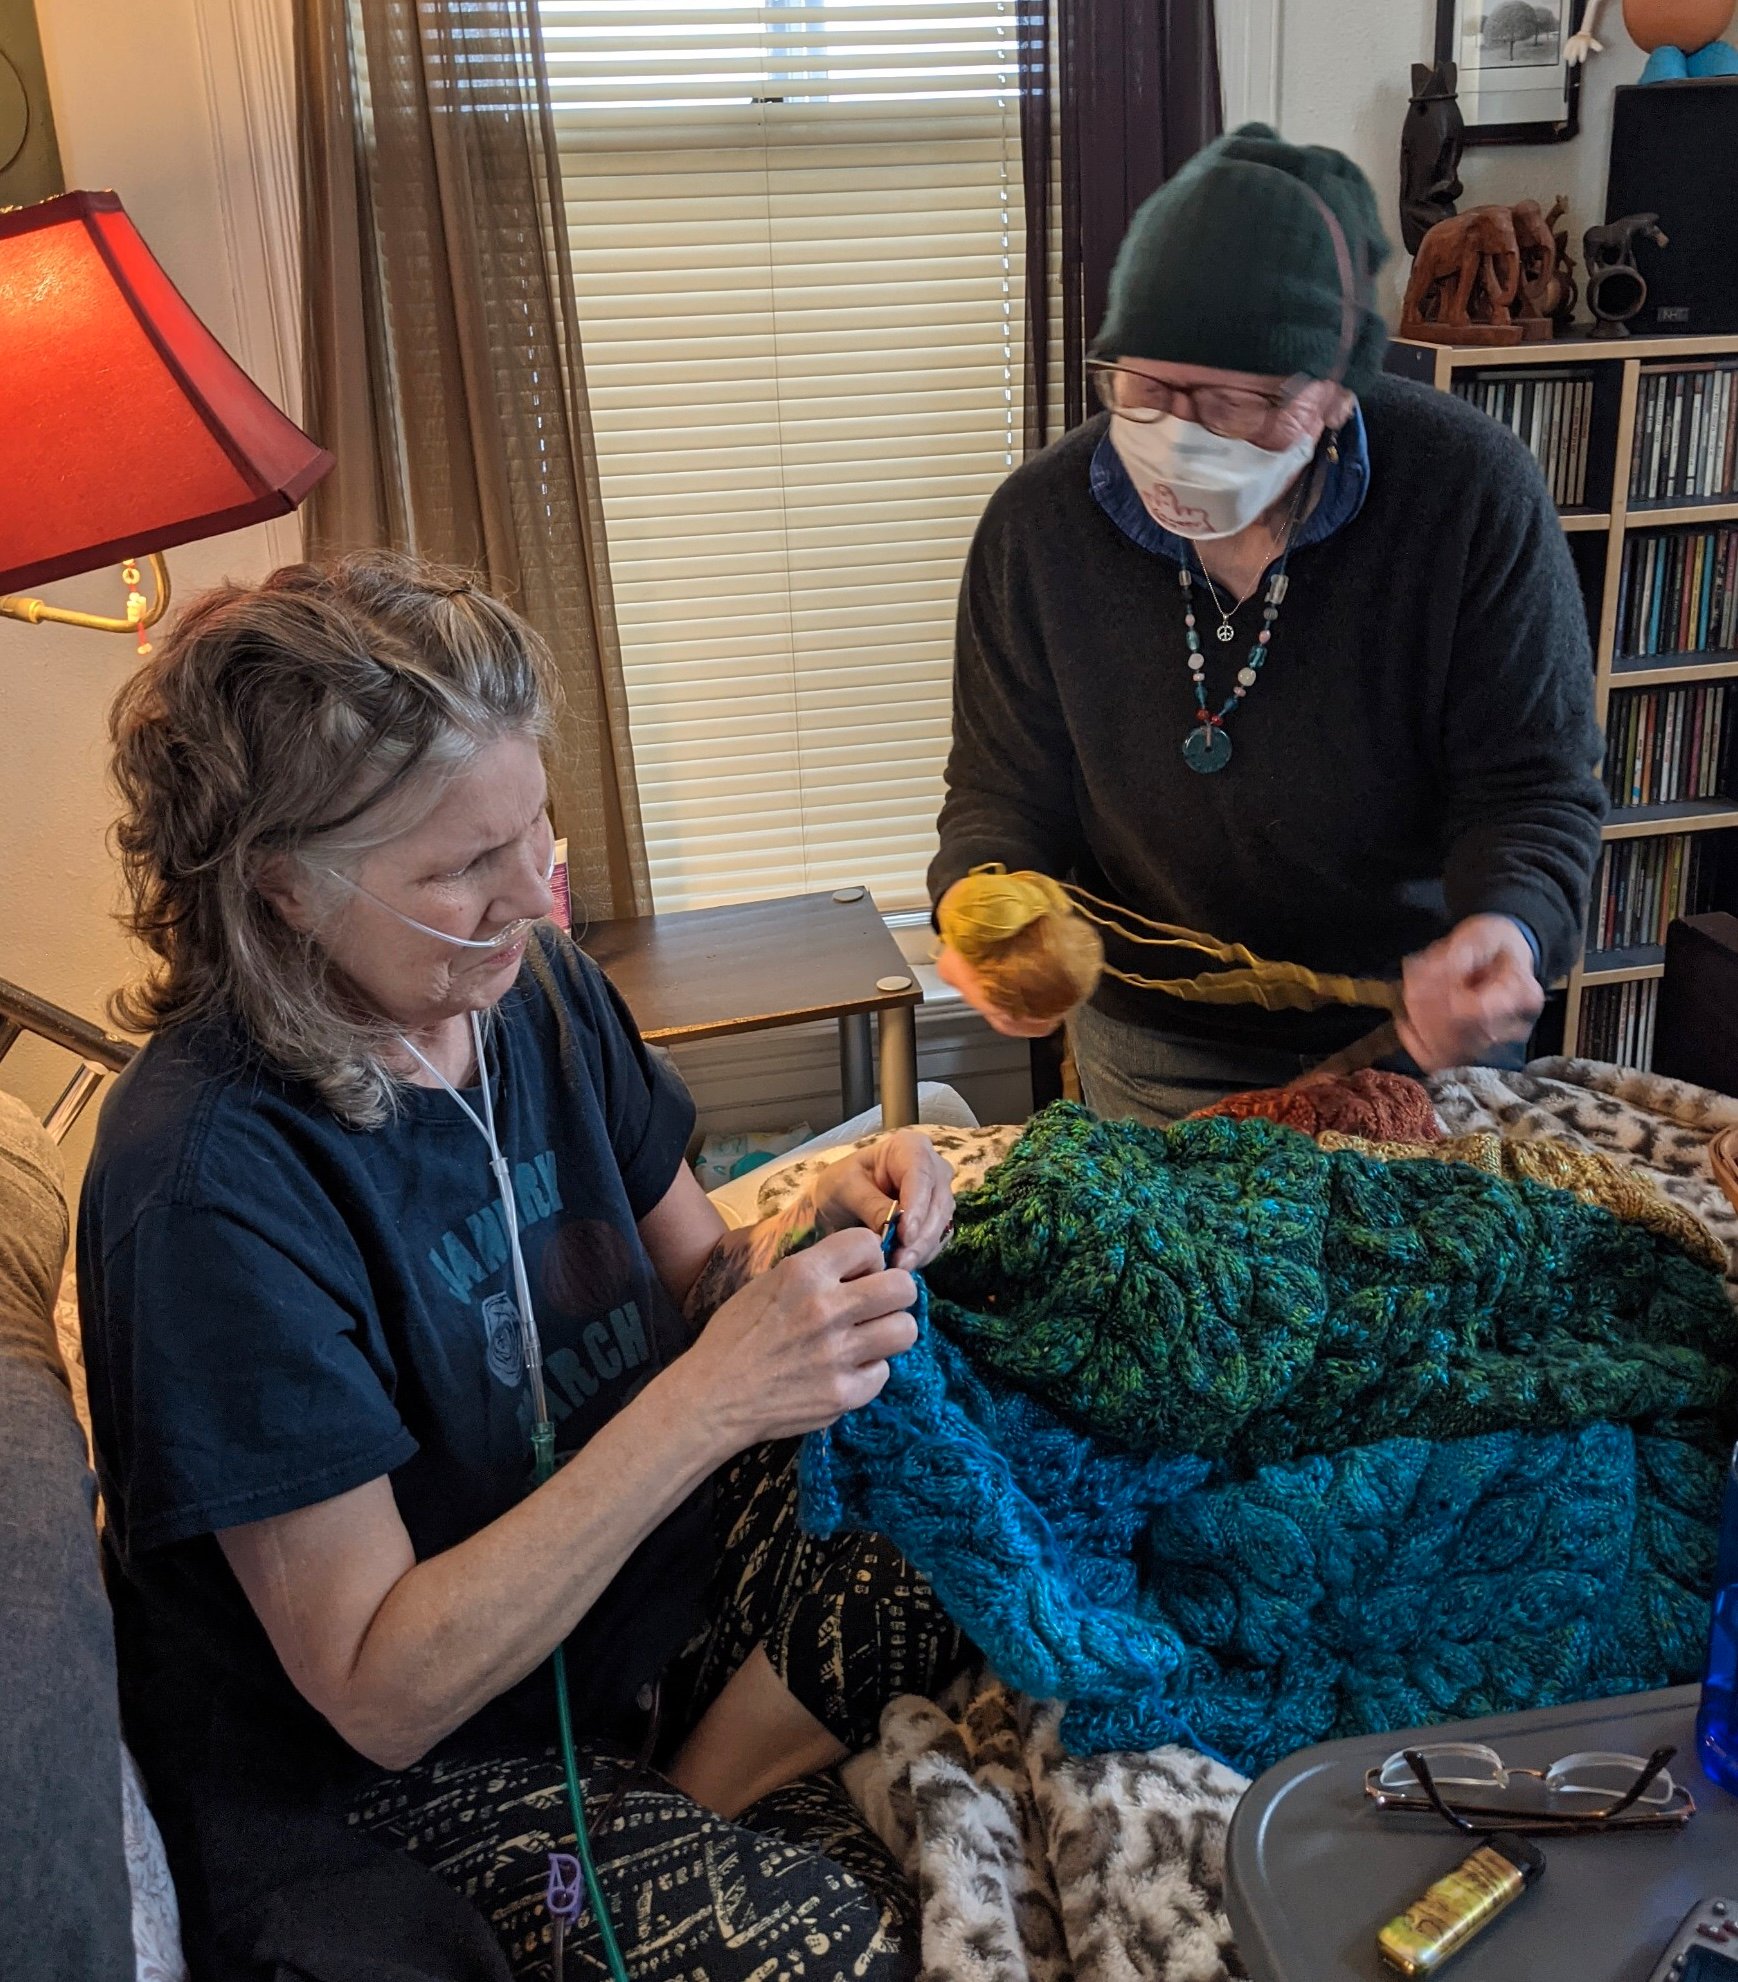 The afghan edging project—Susan and Laura are making it happen!